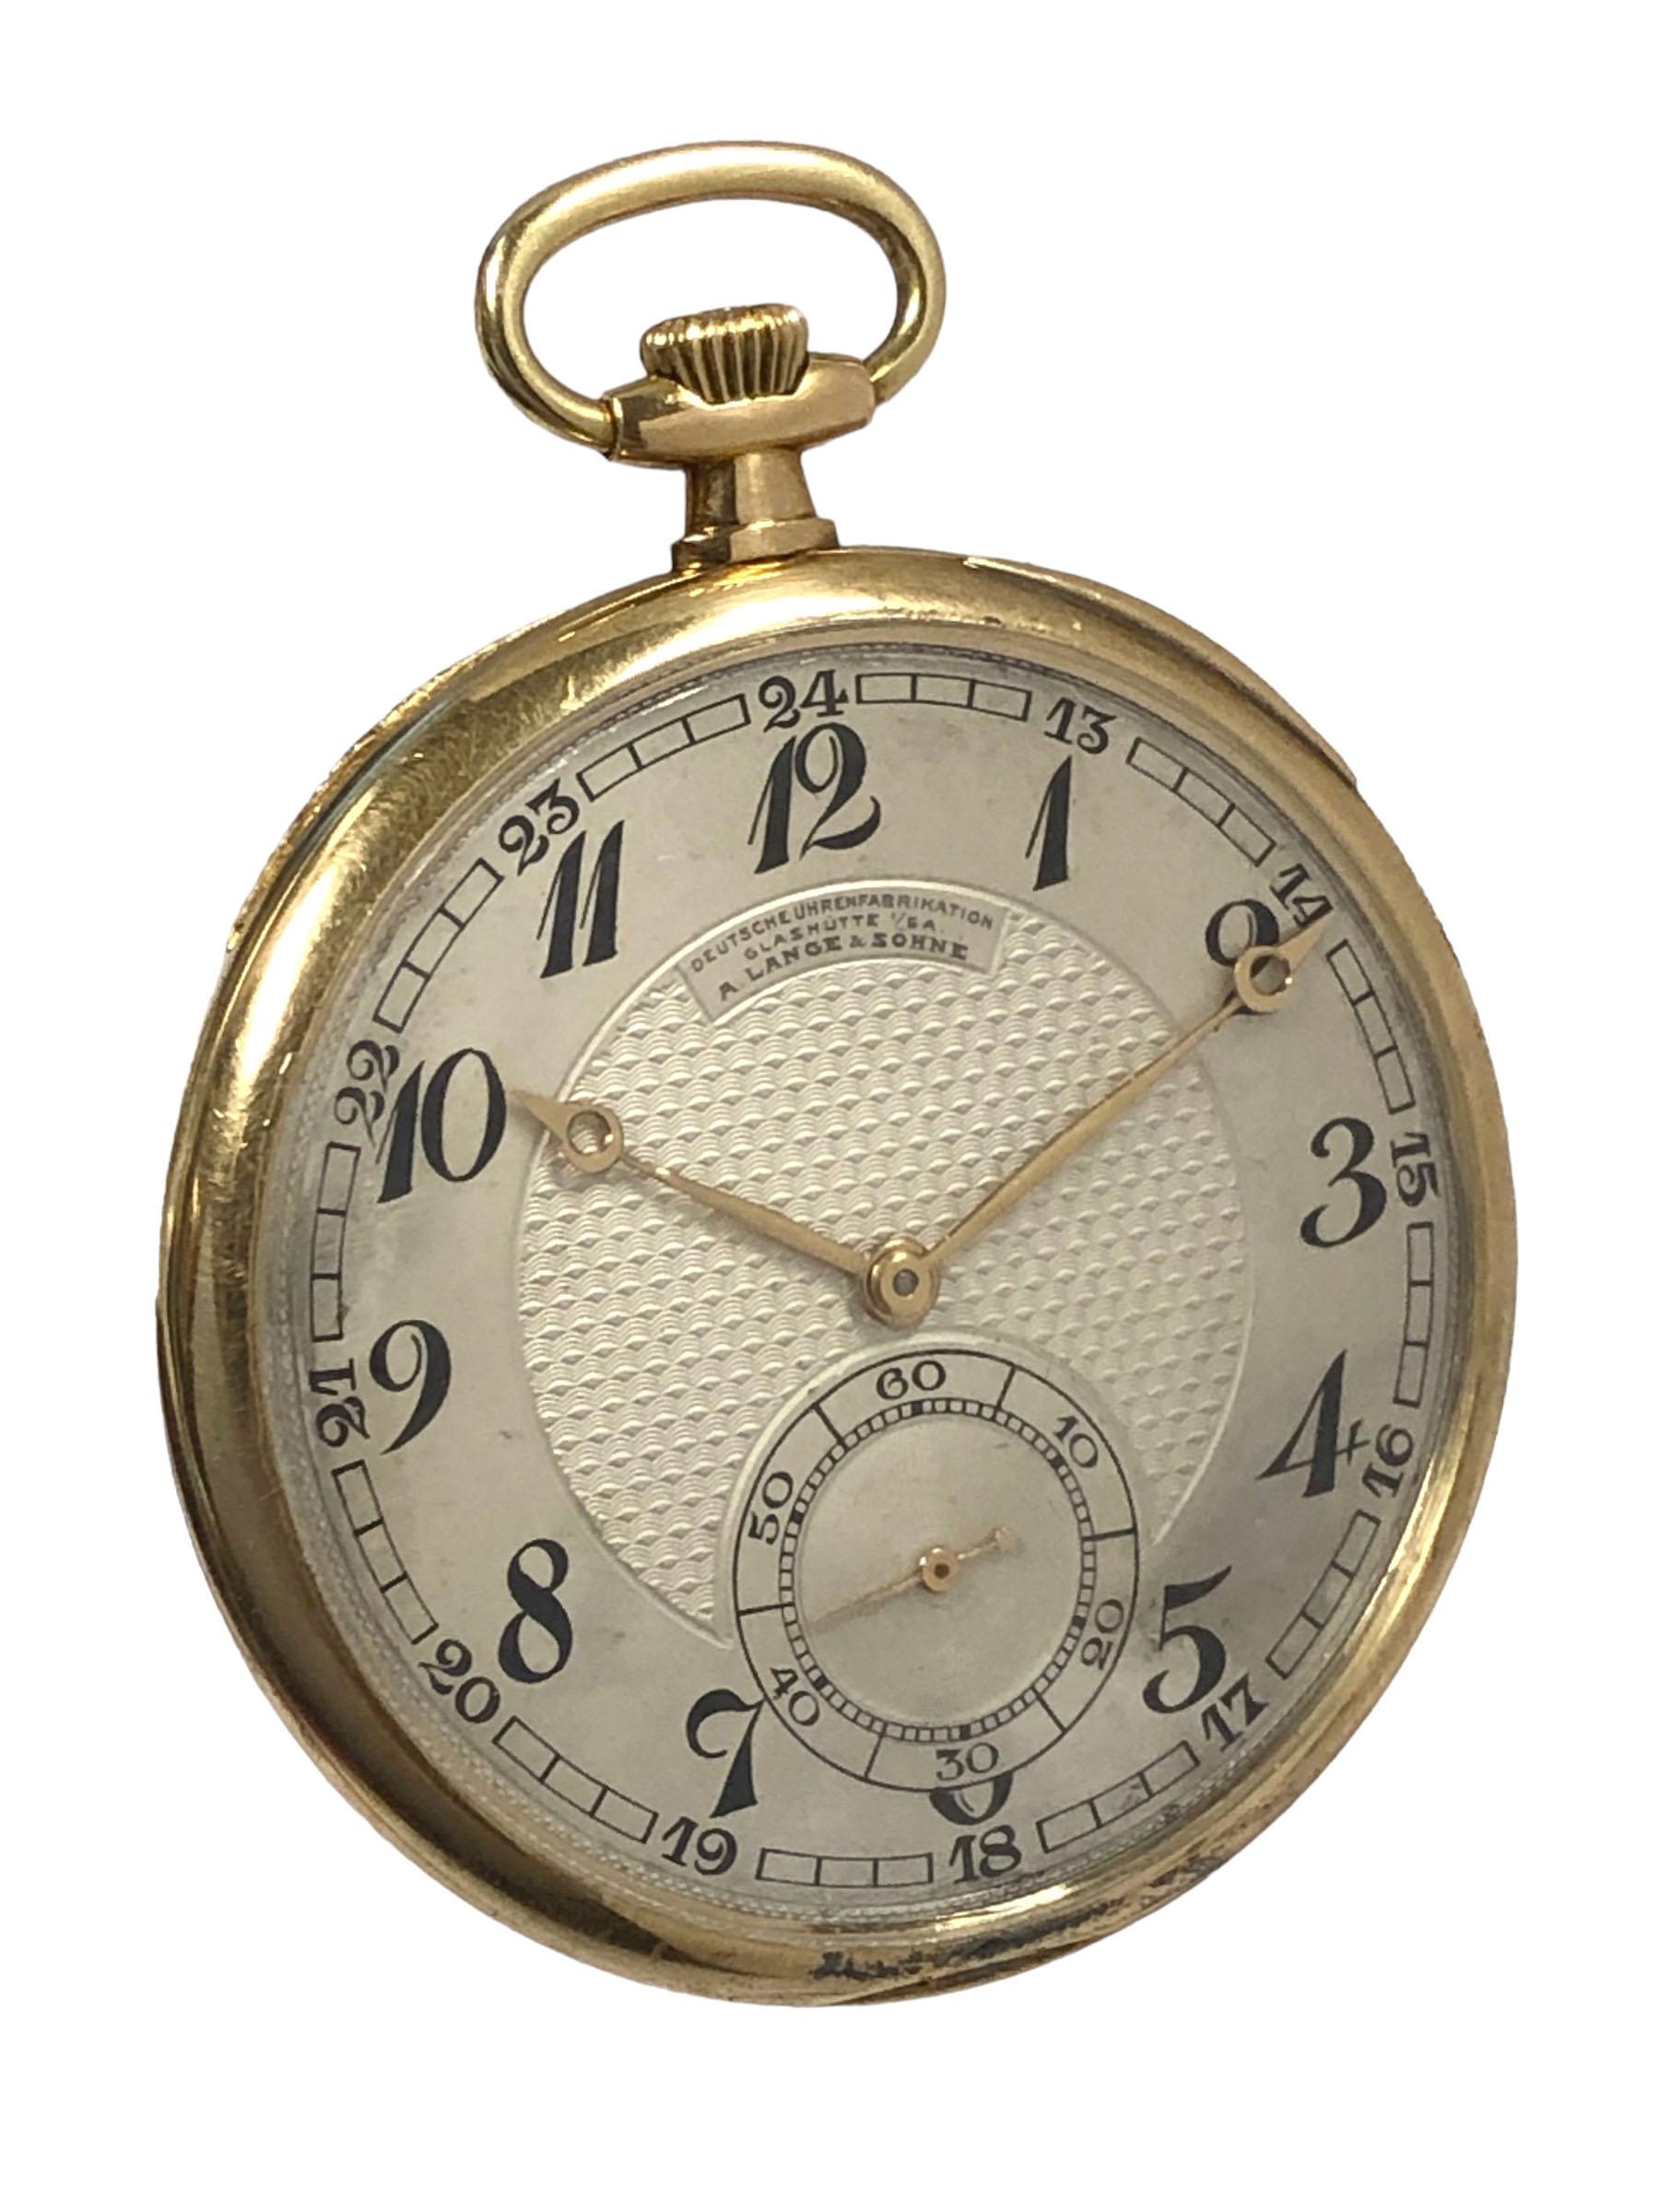 Circa 1920s A. Lange & Sohne Glashutte Pocket Watch, 49 MM 14k Yellow Gold 3 piece case with inside Gold dust cover, 16 Jewel mechanical stem set and wind movement, Beautiful, original and excellent condition Silver Satin dial with Engine turned